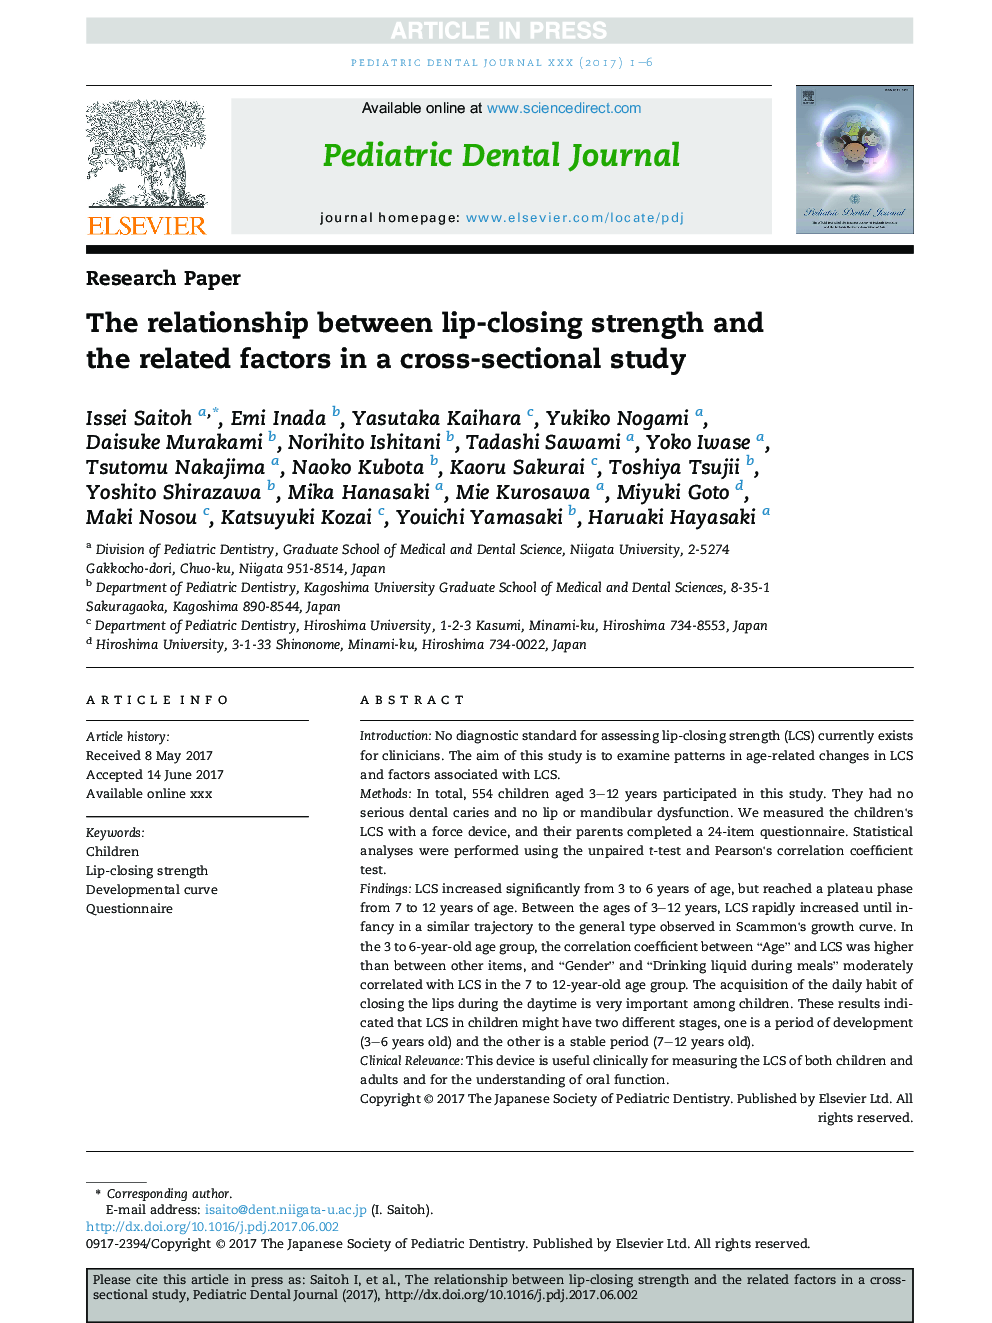 The relationship between lip-closing strength and the related factors in a cross-sectional study